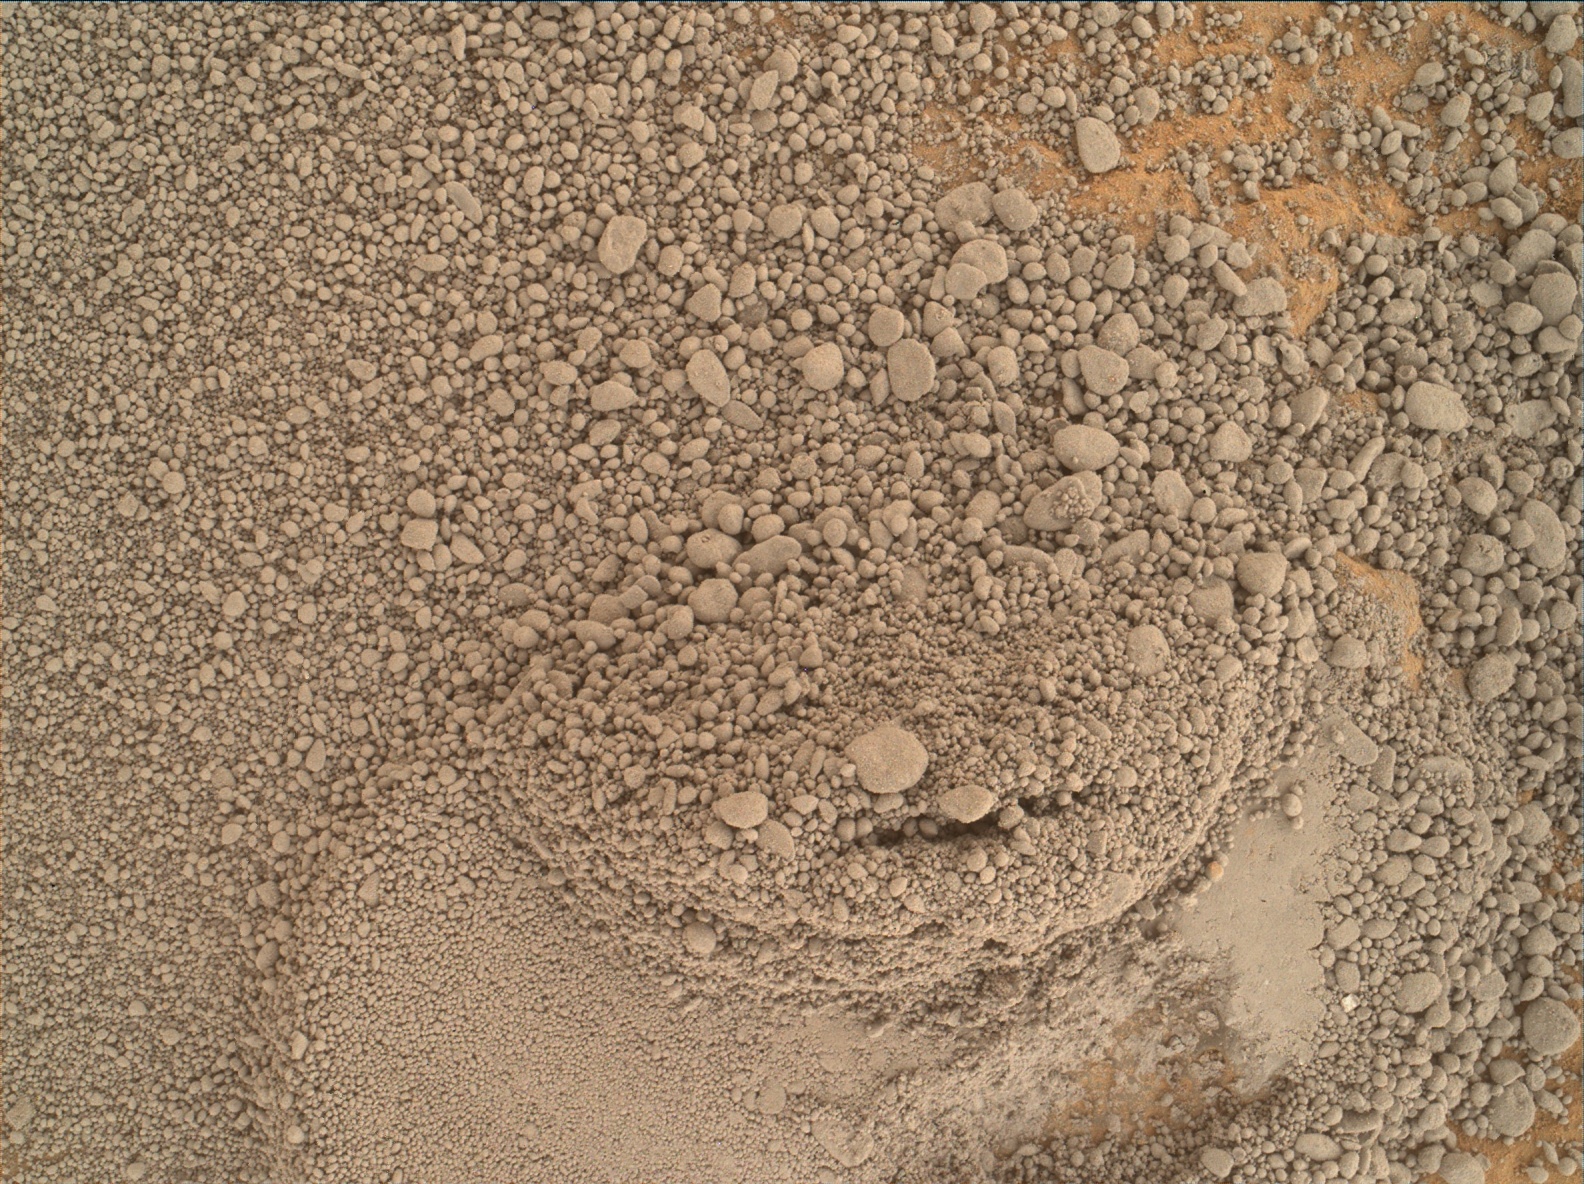 Nasa's Mars rover Curiosity acquired this image using its Mars Hand Lens Imager (MAHLI) on Sol 1369